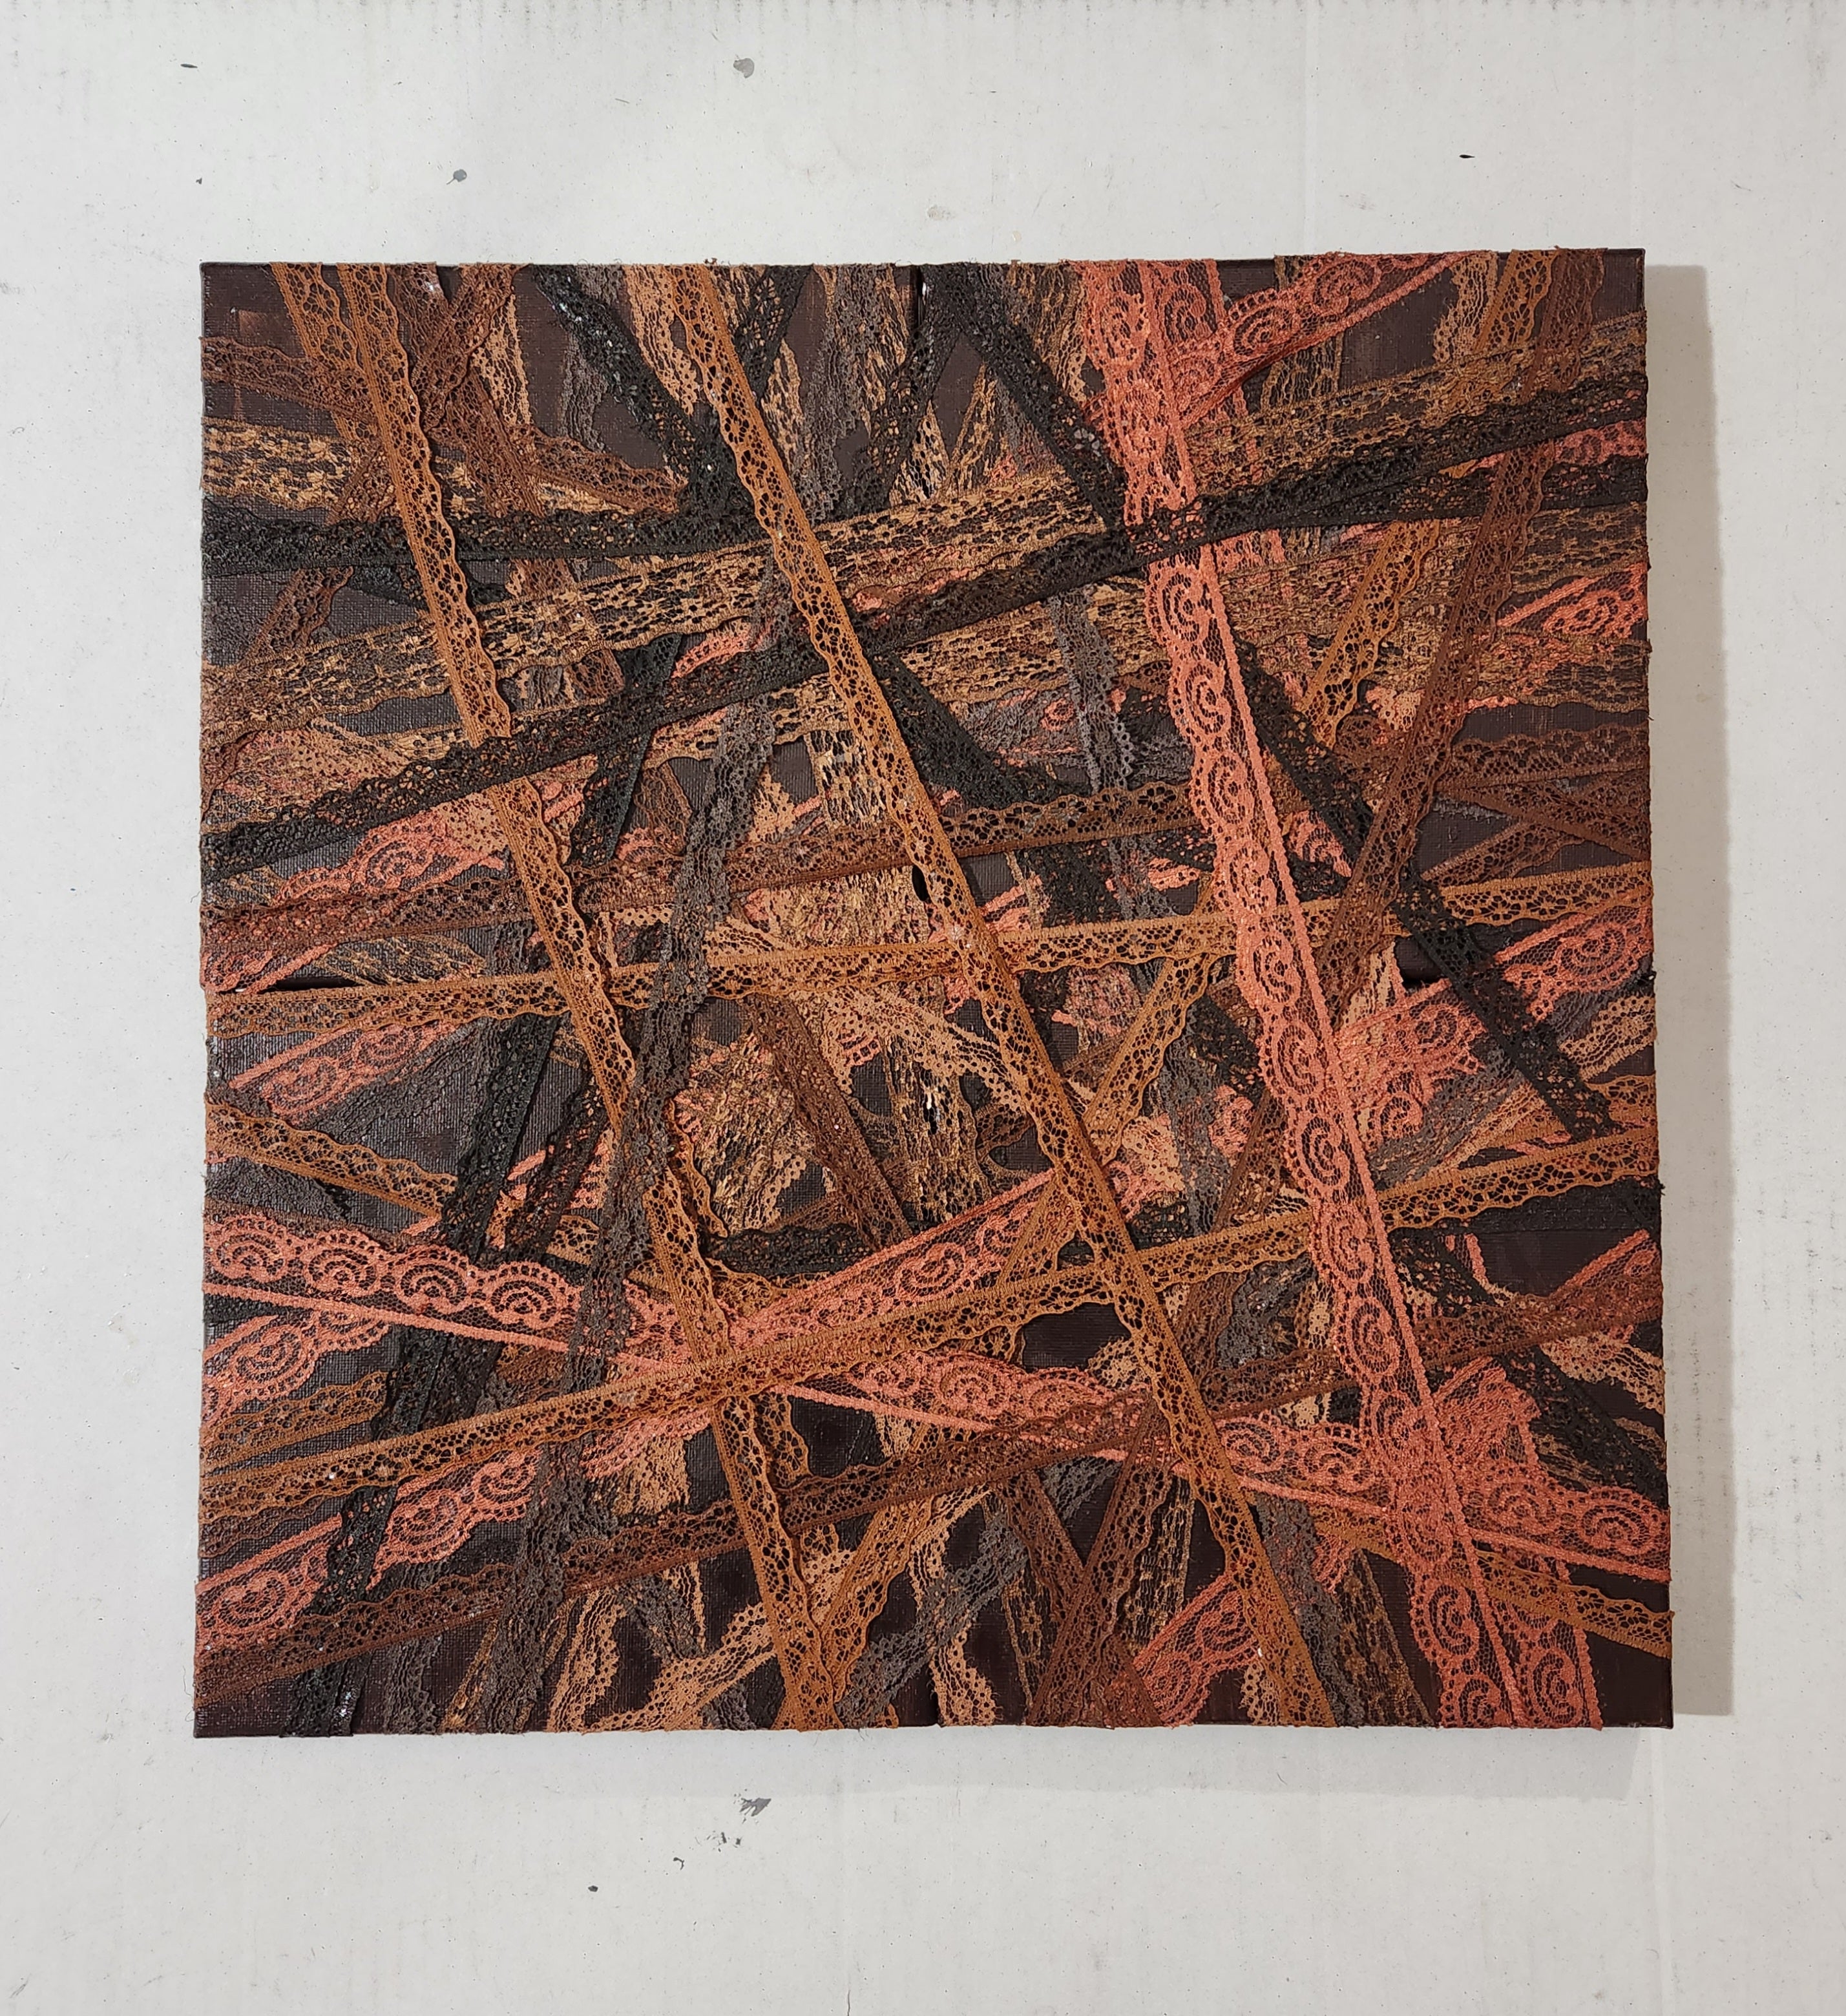 'BROWN WEBS' Acrylic, Lace, and Mixed Media on Canvas